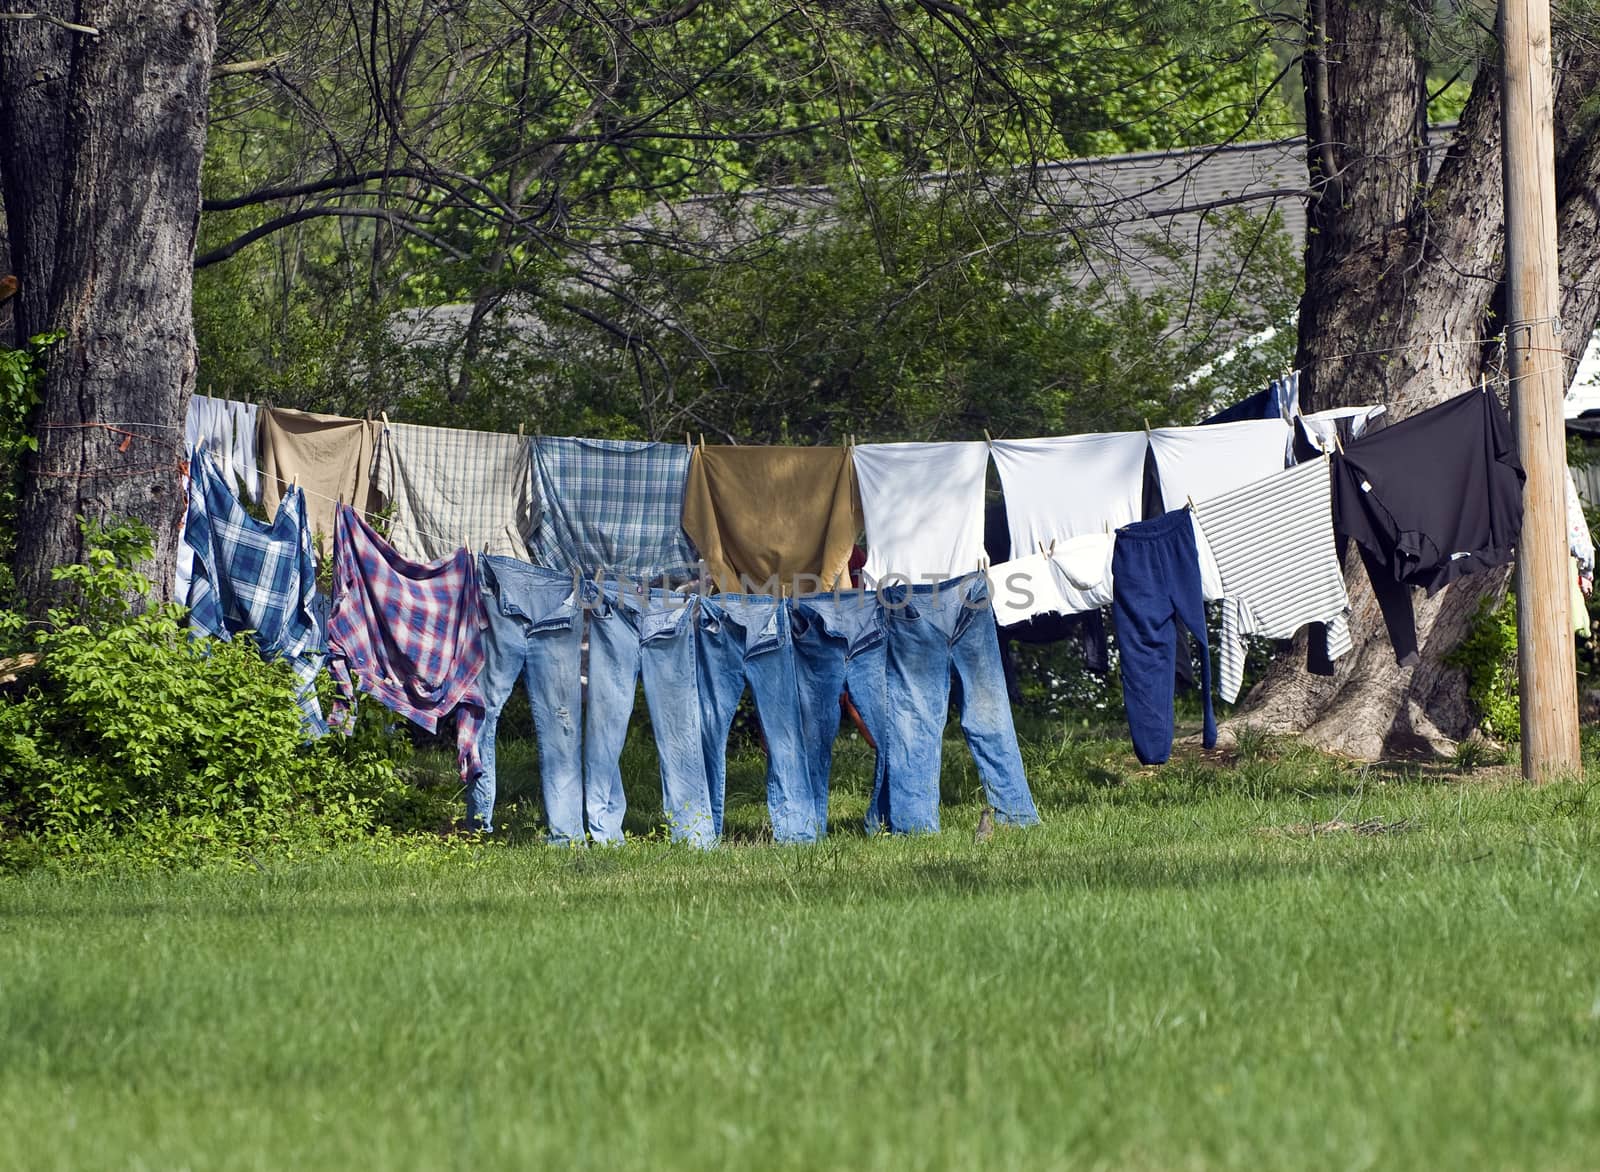 Clean laundry hanging outside on clothesline